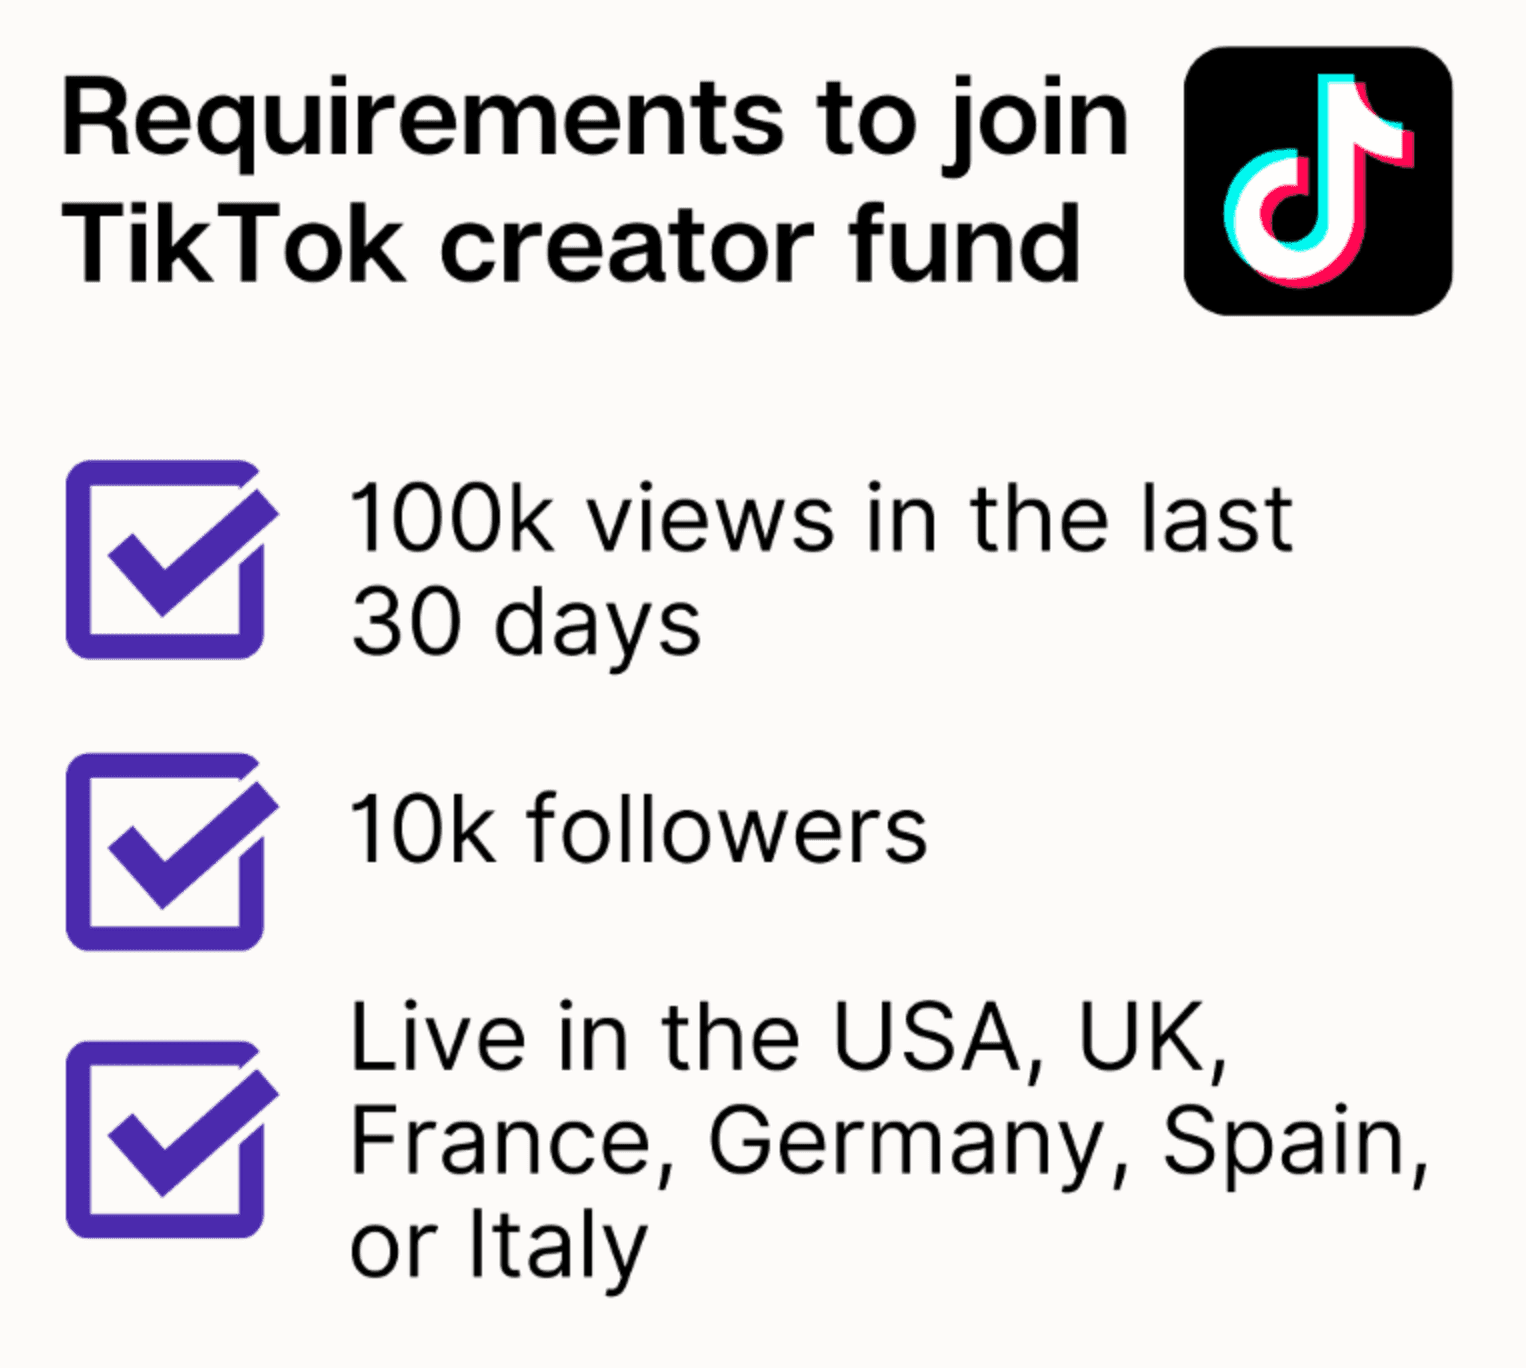 Requirements to join the TikTok creator fund